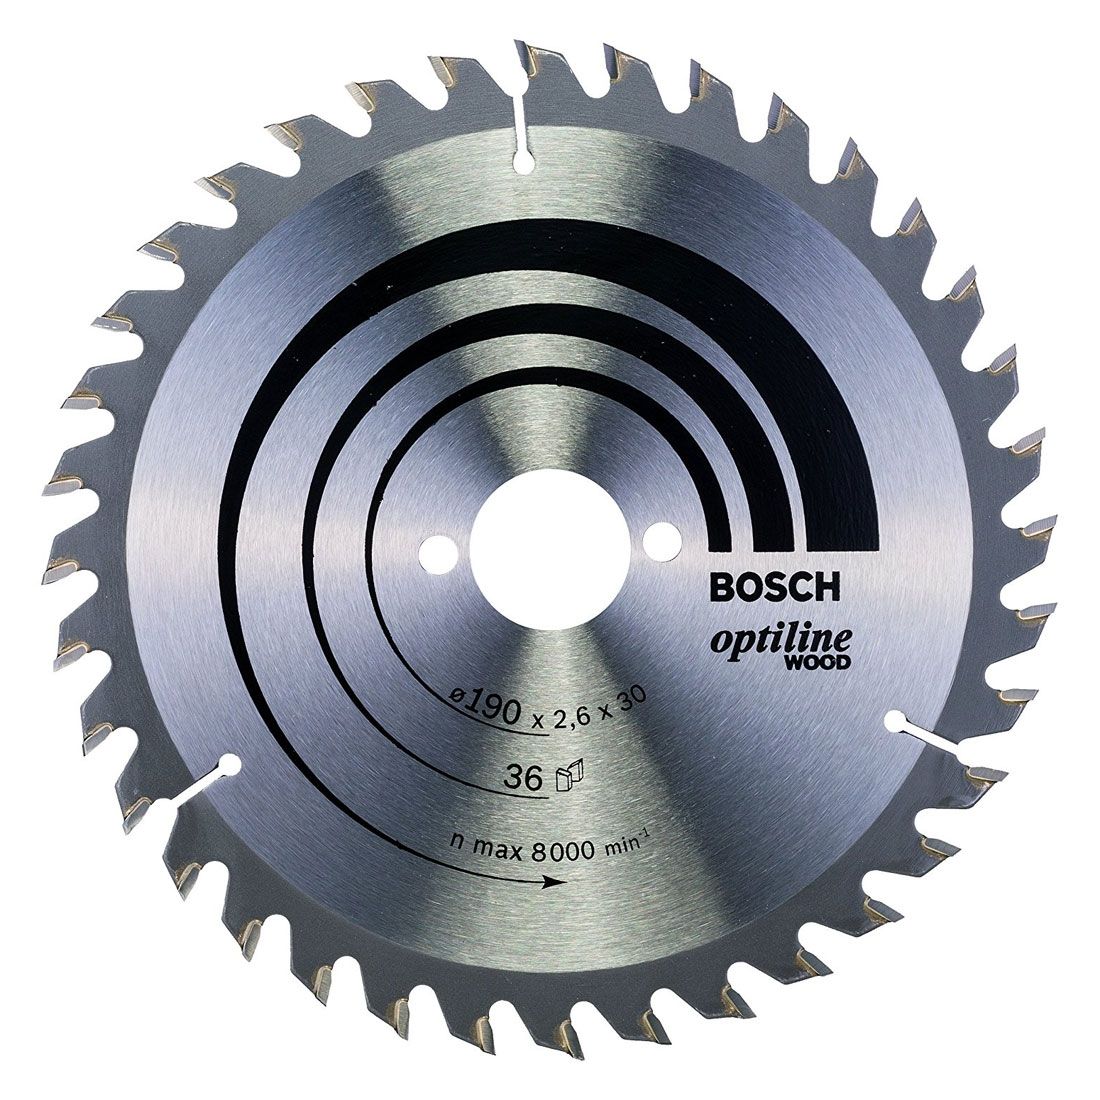 Bosch Optiline Circular Saw Blade for Wood 190 x 30 x 2,6 mm, 36 2608640616 Power Tool Services